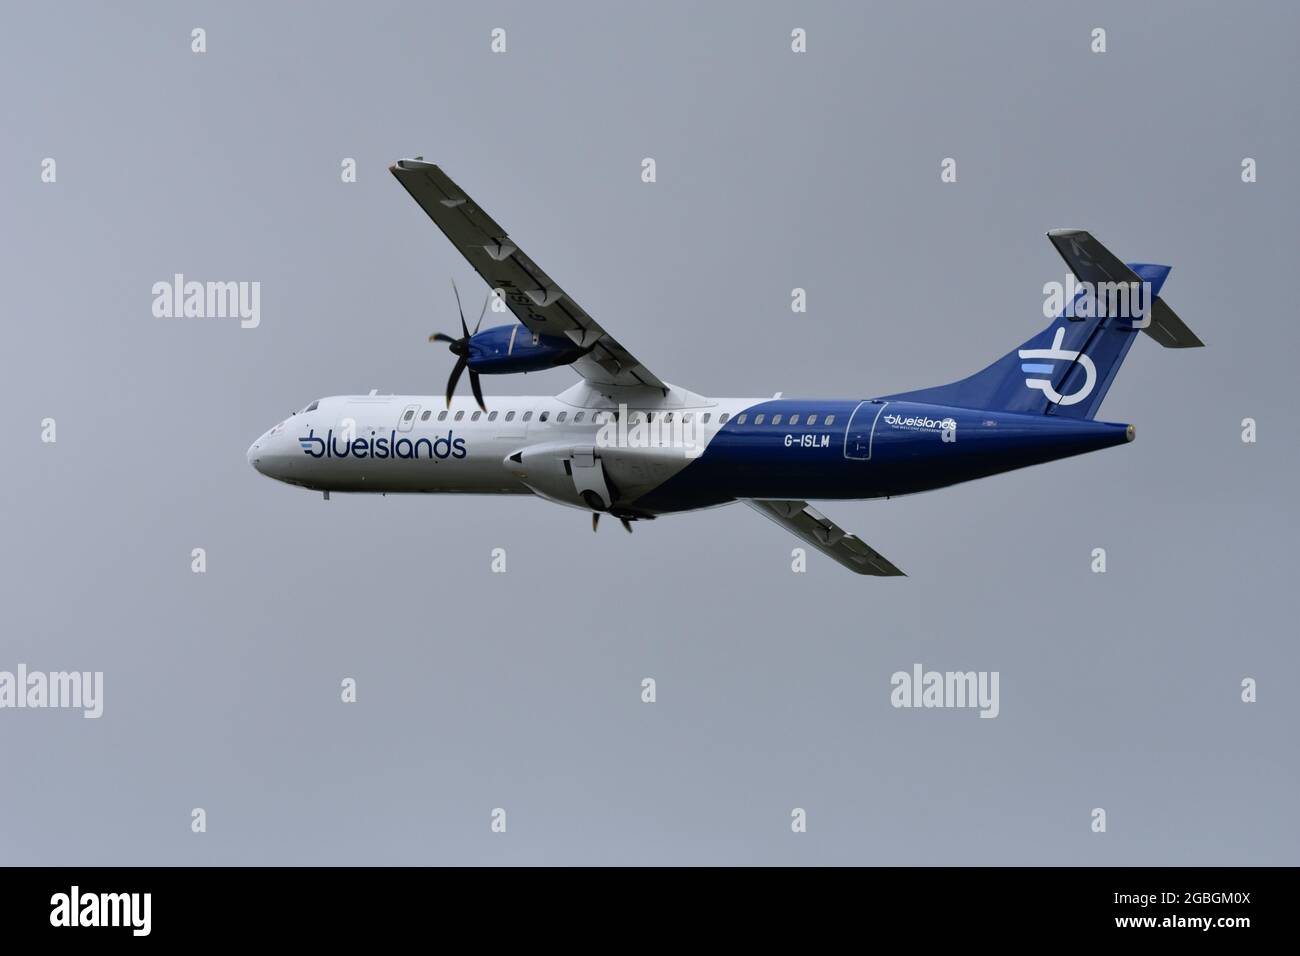 A Blue Islands Regional airline in the sky above Bristol Airport, England, UK Stock Photo